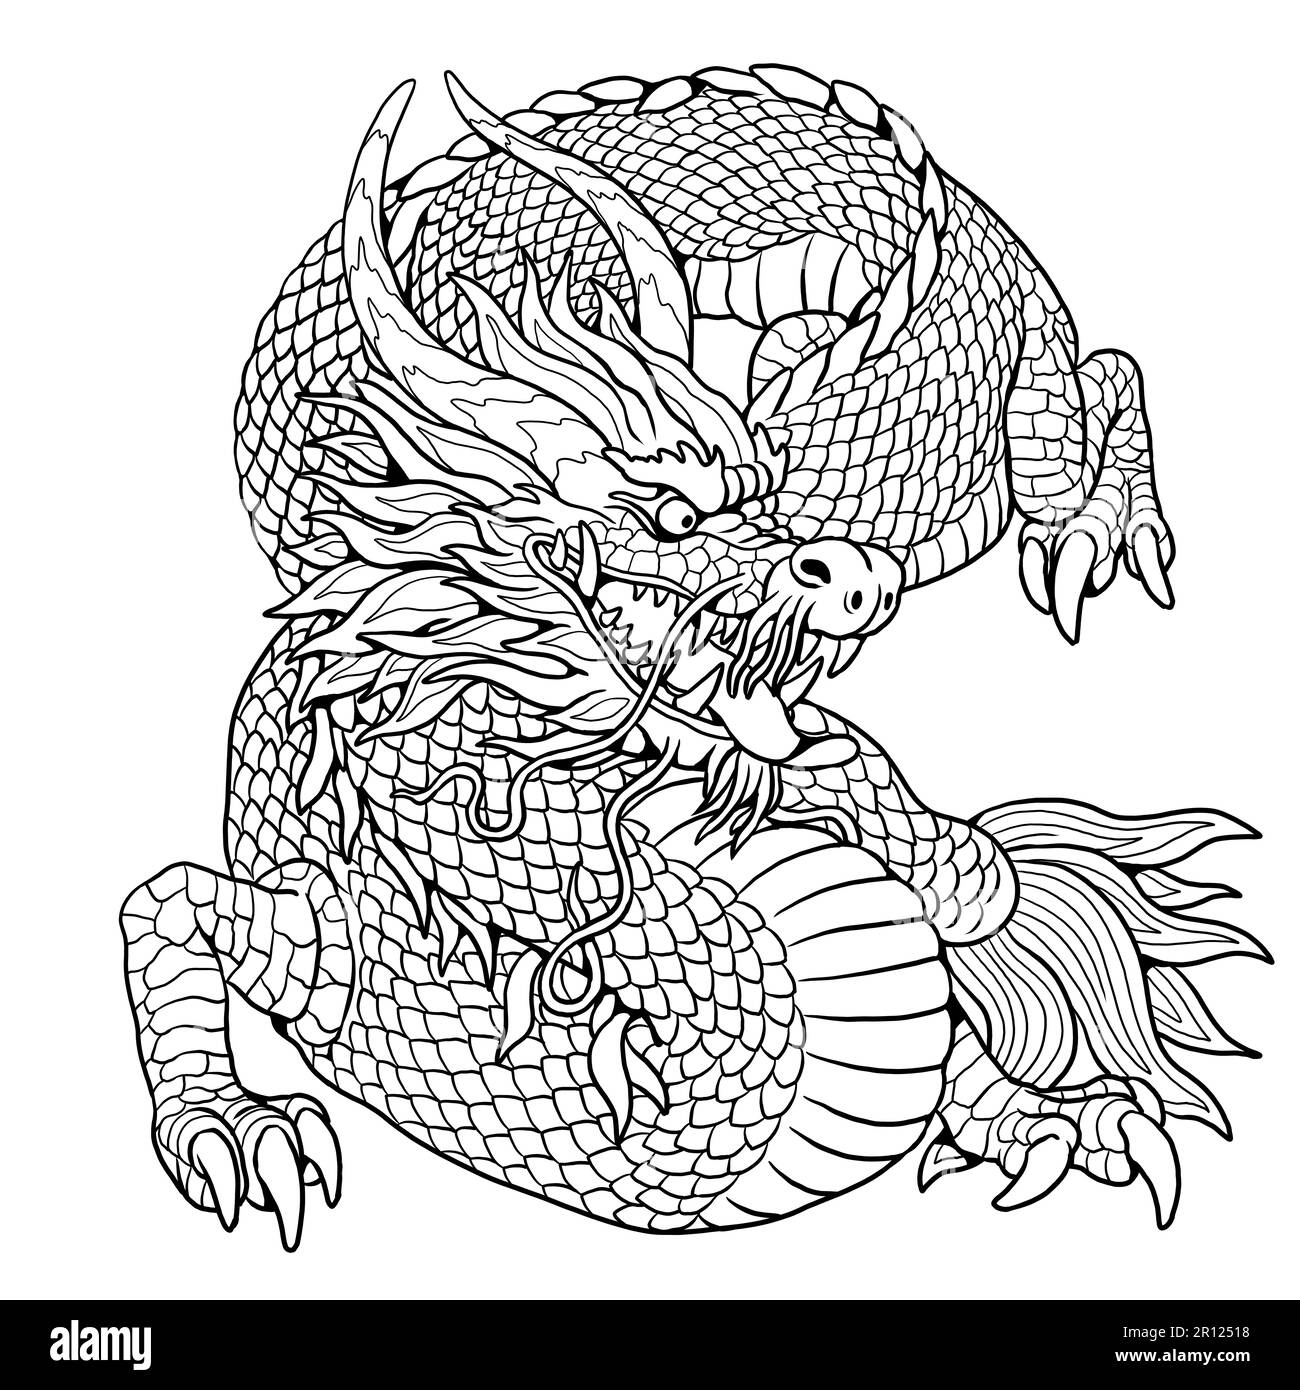 SIMON ONG DESIGNS  Design and Illustration  Chinese Guardian Lion Sketch